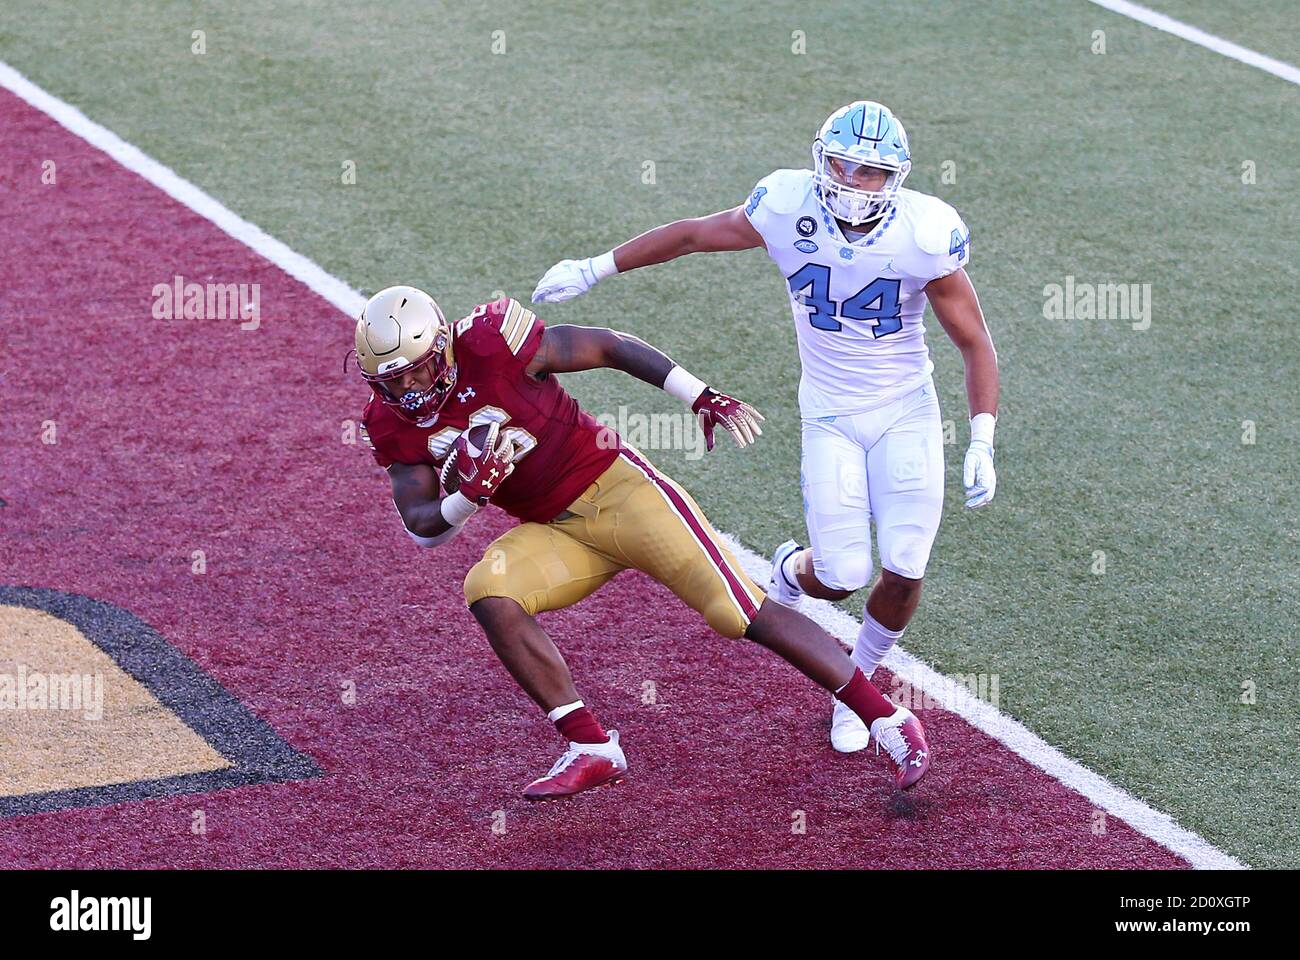 Alumni Stadium. 3rd Oct, 2020. MA, USA; Boston College Eagles running back David Bailey (26) catches a touchdown pass while defended by North Carolina Tar Heels linebacker Jeremiah Gemmel (44) during the NCAA football game between North Carolina Tar Heels and Boston College Eagles at Alumni Stadium. Anthony Nesmith/CSM/Alamy Live News Stock Photo